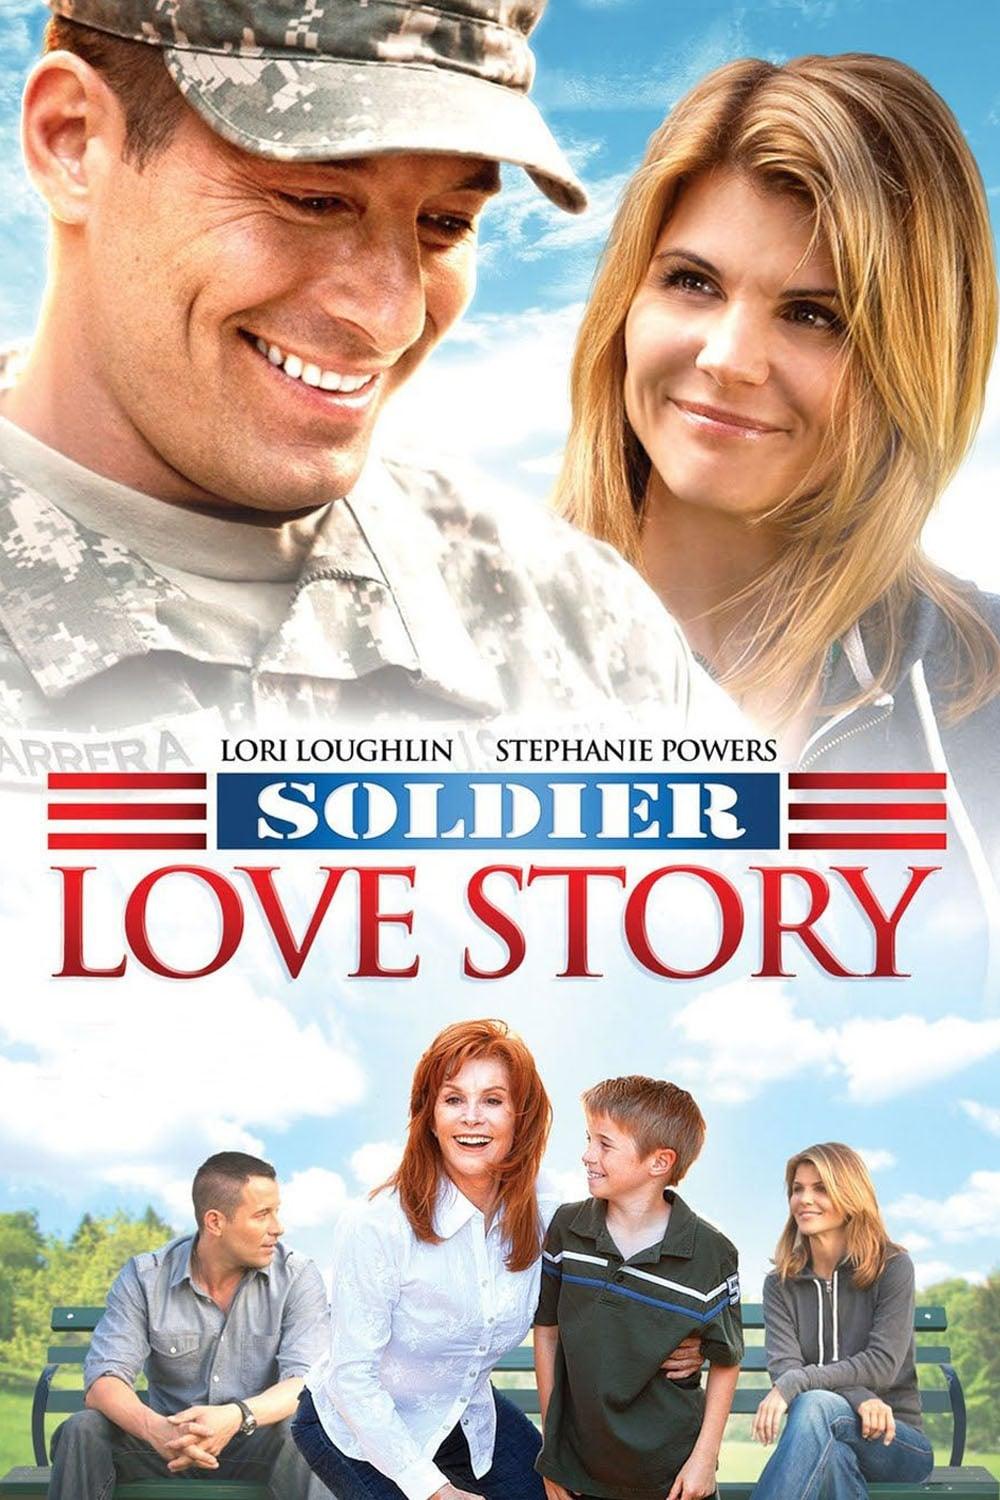 A Soldier's Love Story poster